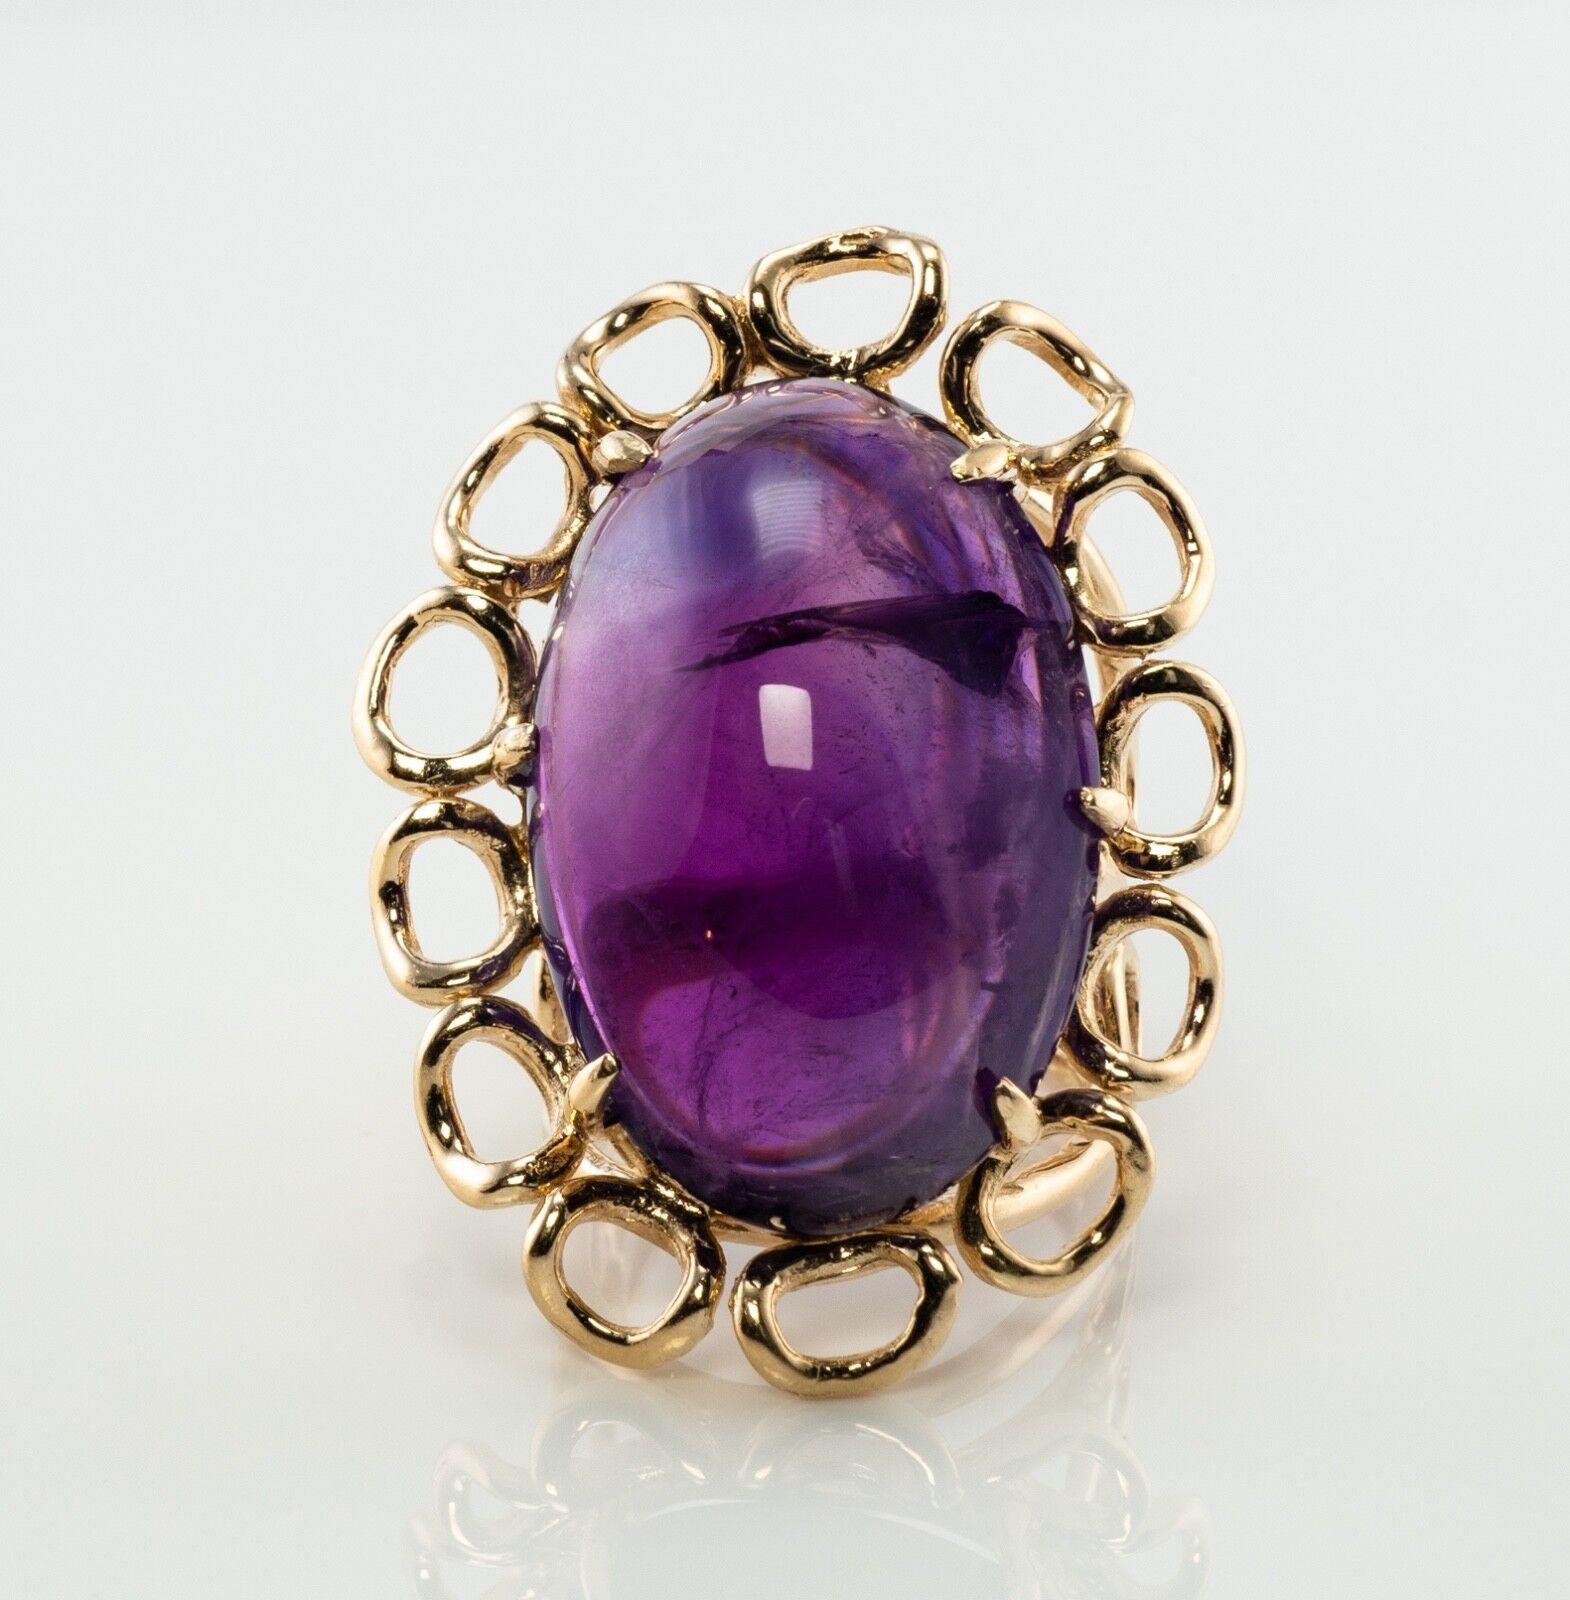 Amethyst Ring Cabochon 14K Gold Cocktail Ring

This spectacular vintage ring is finely crafted in solid 14K Yellow Gold (carefully tested and guaranteed), and set with natural Earth mined Amethyst cabochon. The genuine Amethyst cabochon measures